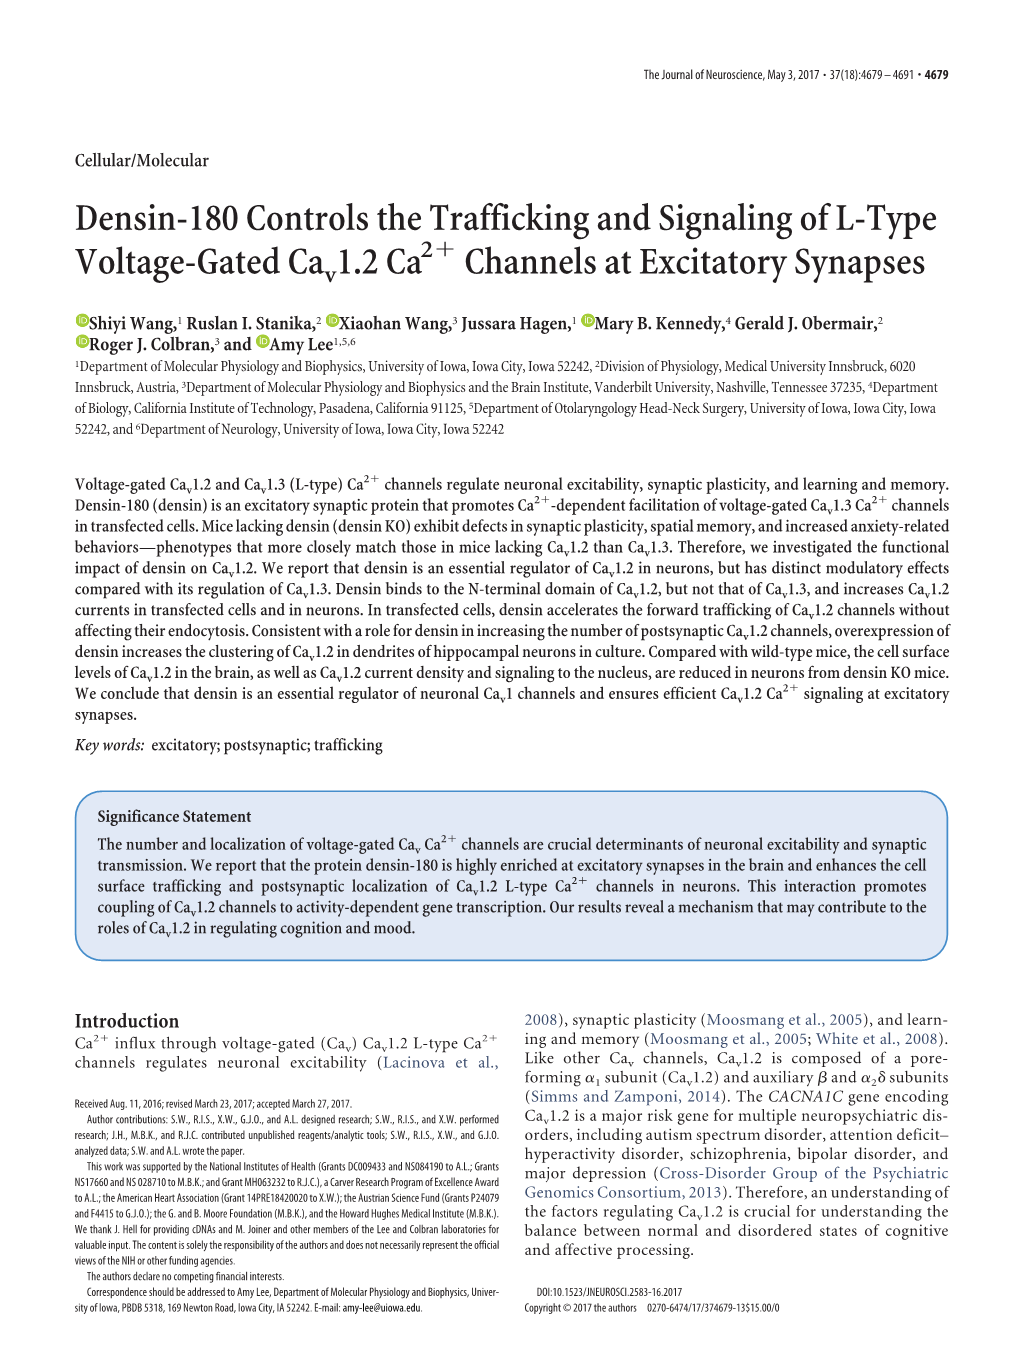 Densin-180 Controls the Trafficking and Signaling of L-Type Voltage